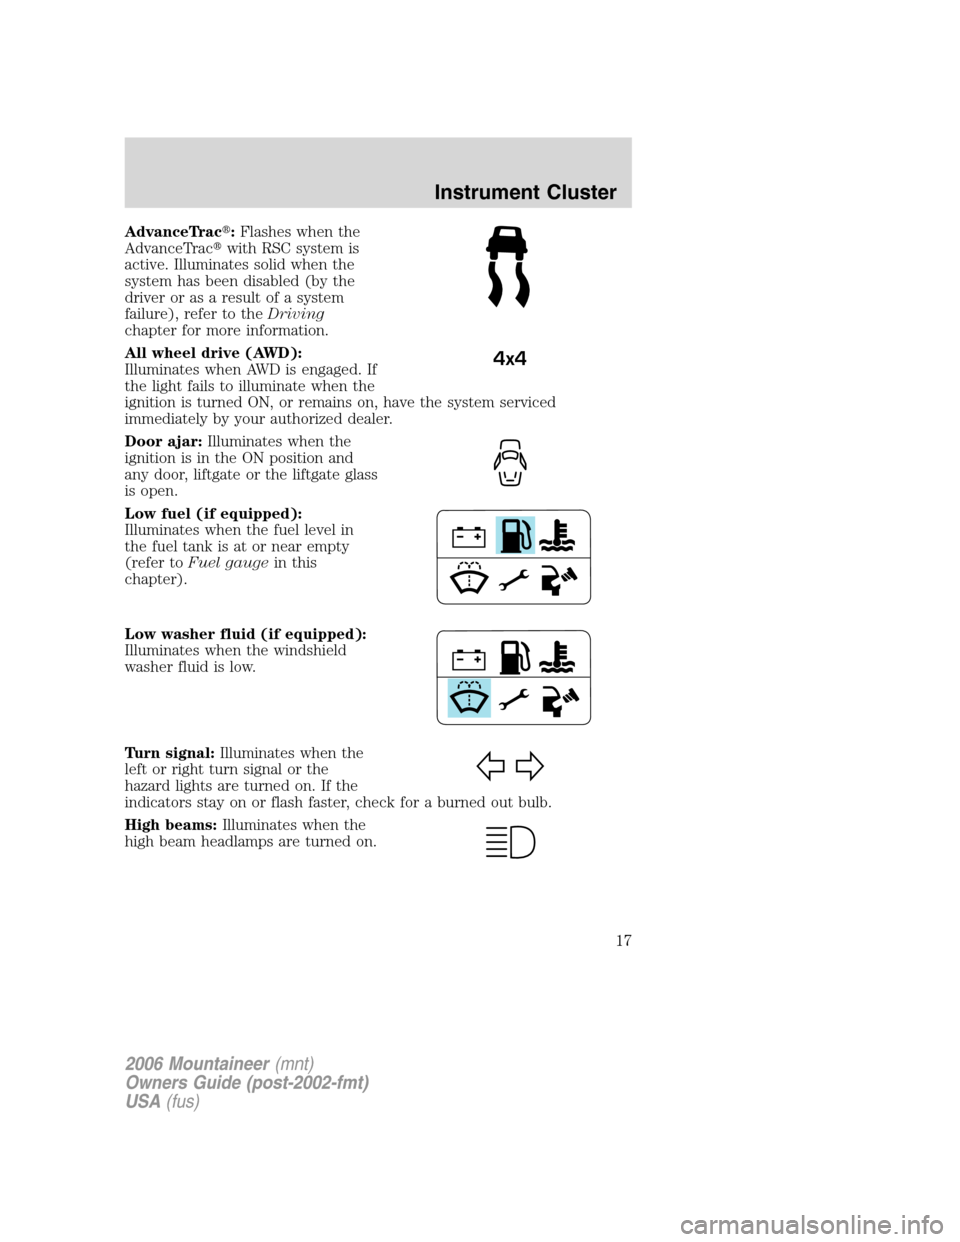 Mercury Mountaineer 2006  Owners Manuals AdvanceTrac:Flashes when the
AdvanceTracwith RSC system is
active. Illuminates solid when the
system has been disabled (by the
driver or as a result of a system
failure), refer to theDriving
chapter